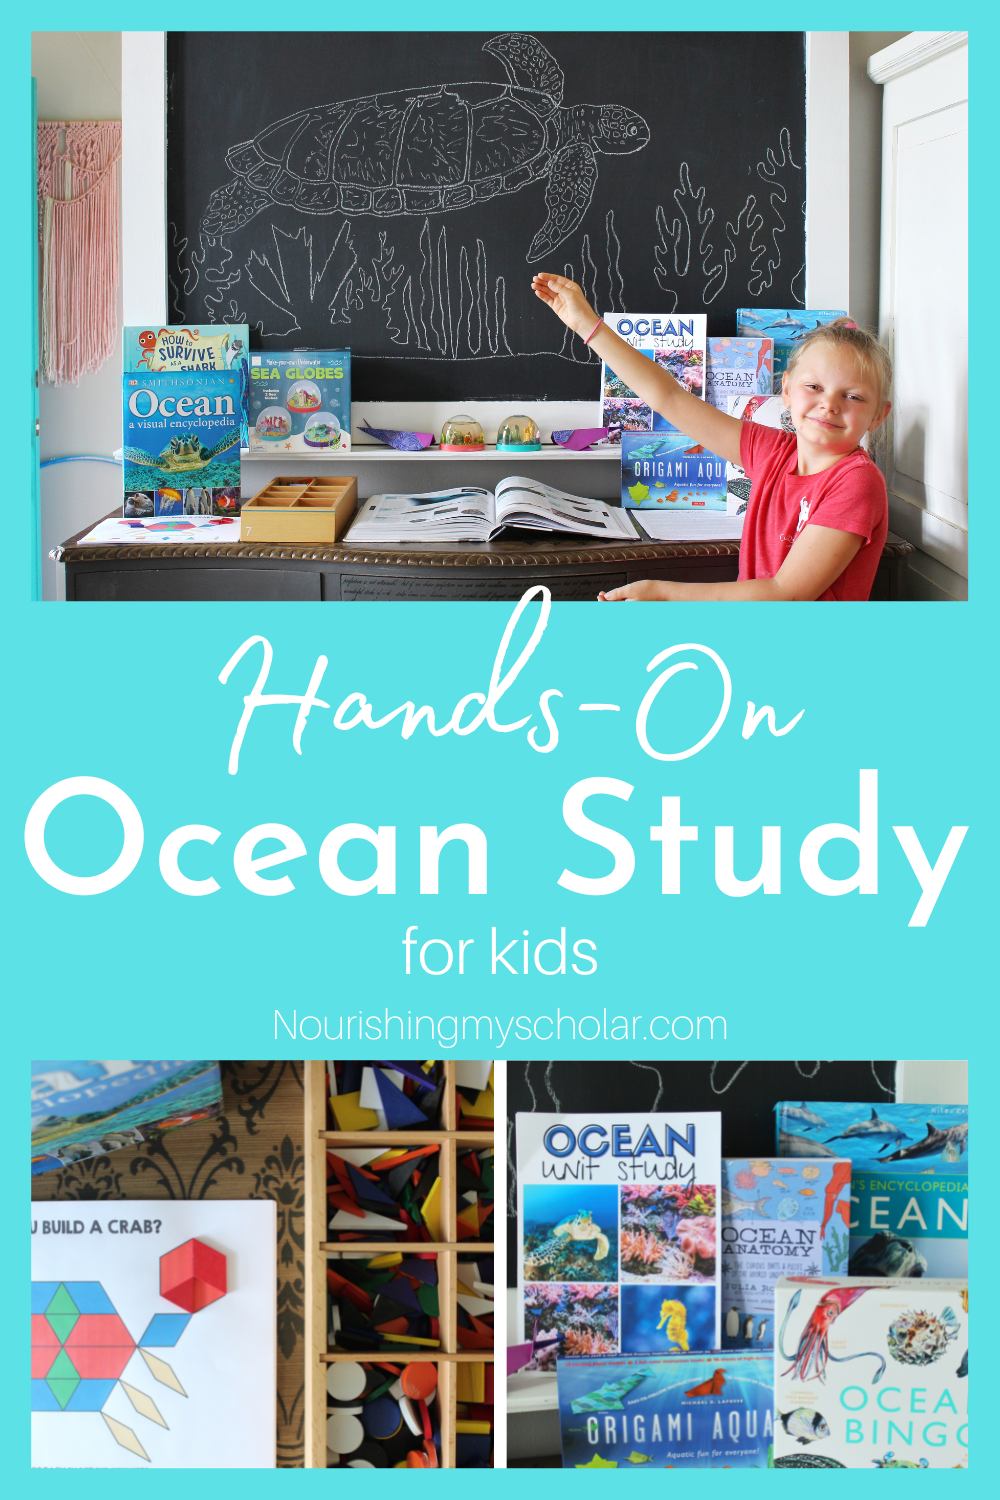 Hands-On Ocean Study for Kids: A hands-on ocean study for kids is the perfect way to beat the heat by diving deep into the blue and all it contains. Explore books, games, videos, and hands-on activities to keep your ocean-loving kiddos happy and learning! #handson #oceanunitstudy #TheWaldockWayOceanUnitStudy #oceanstudy